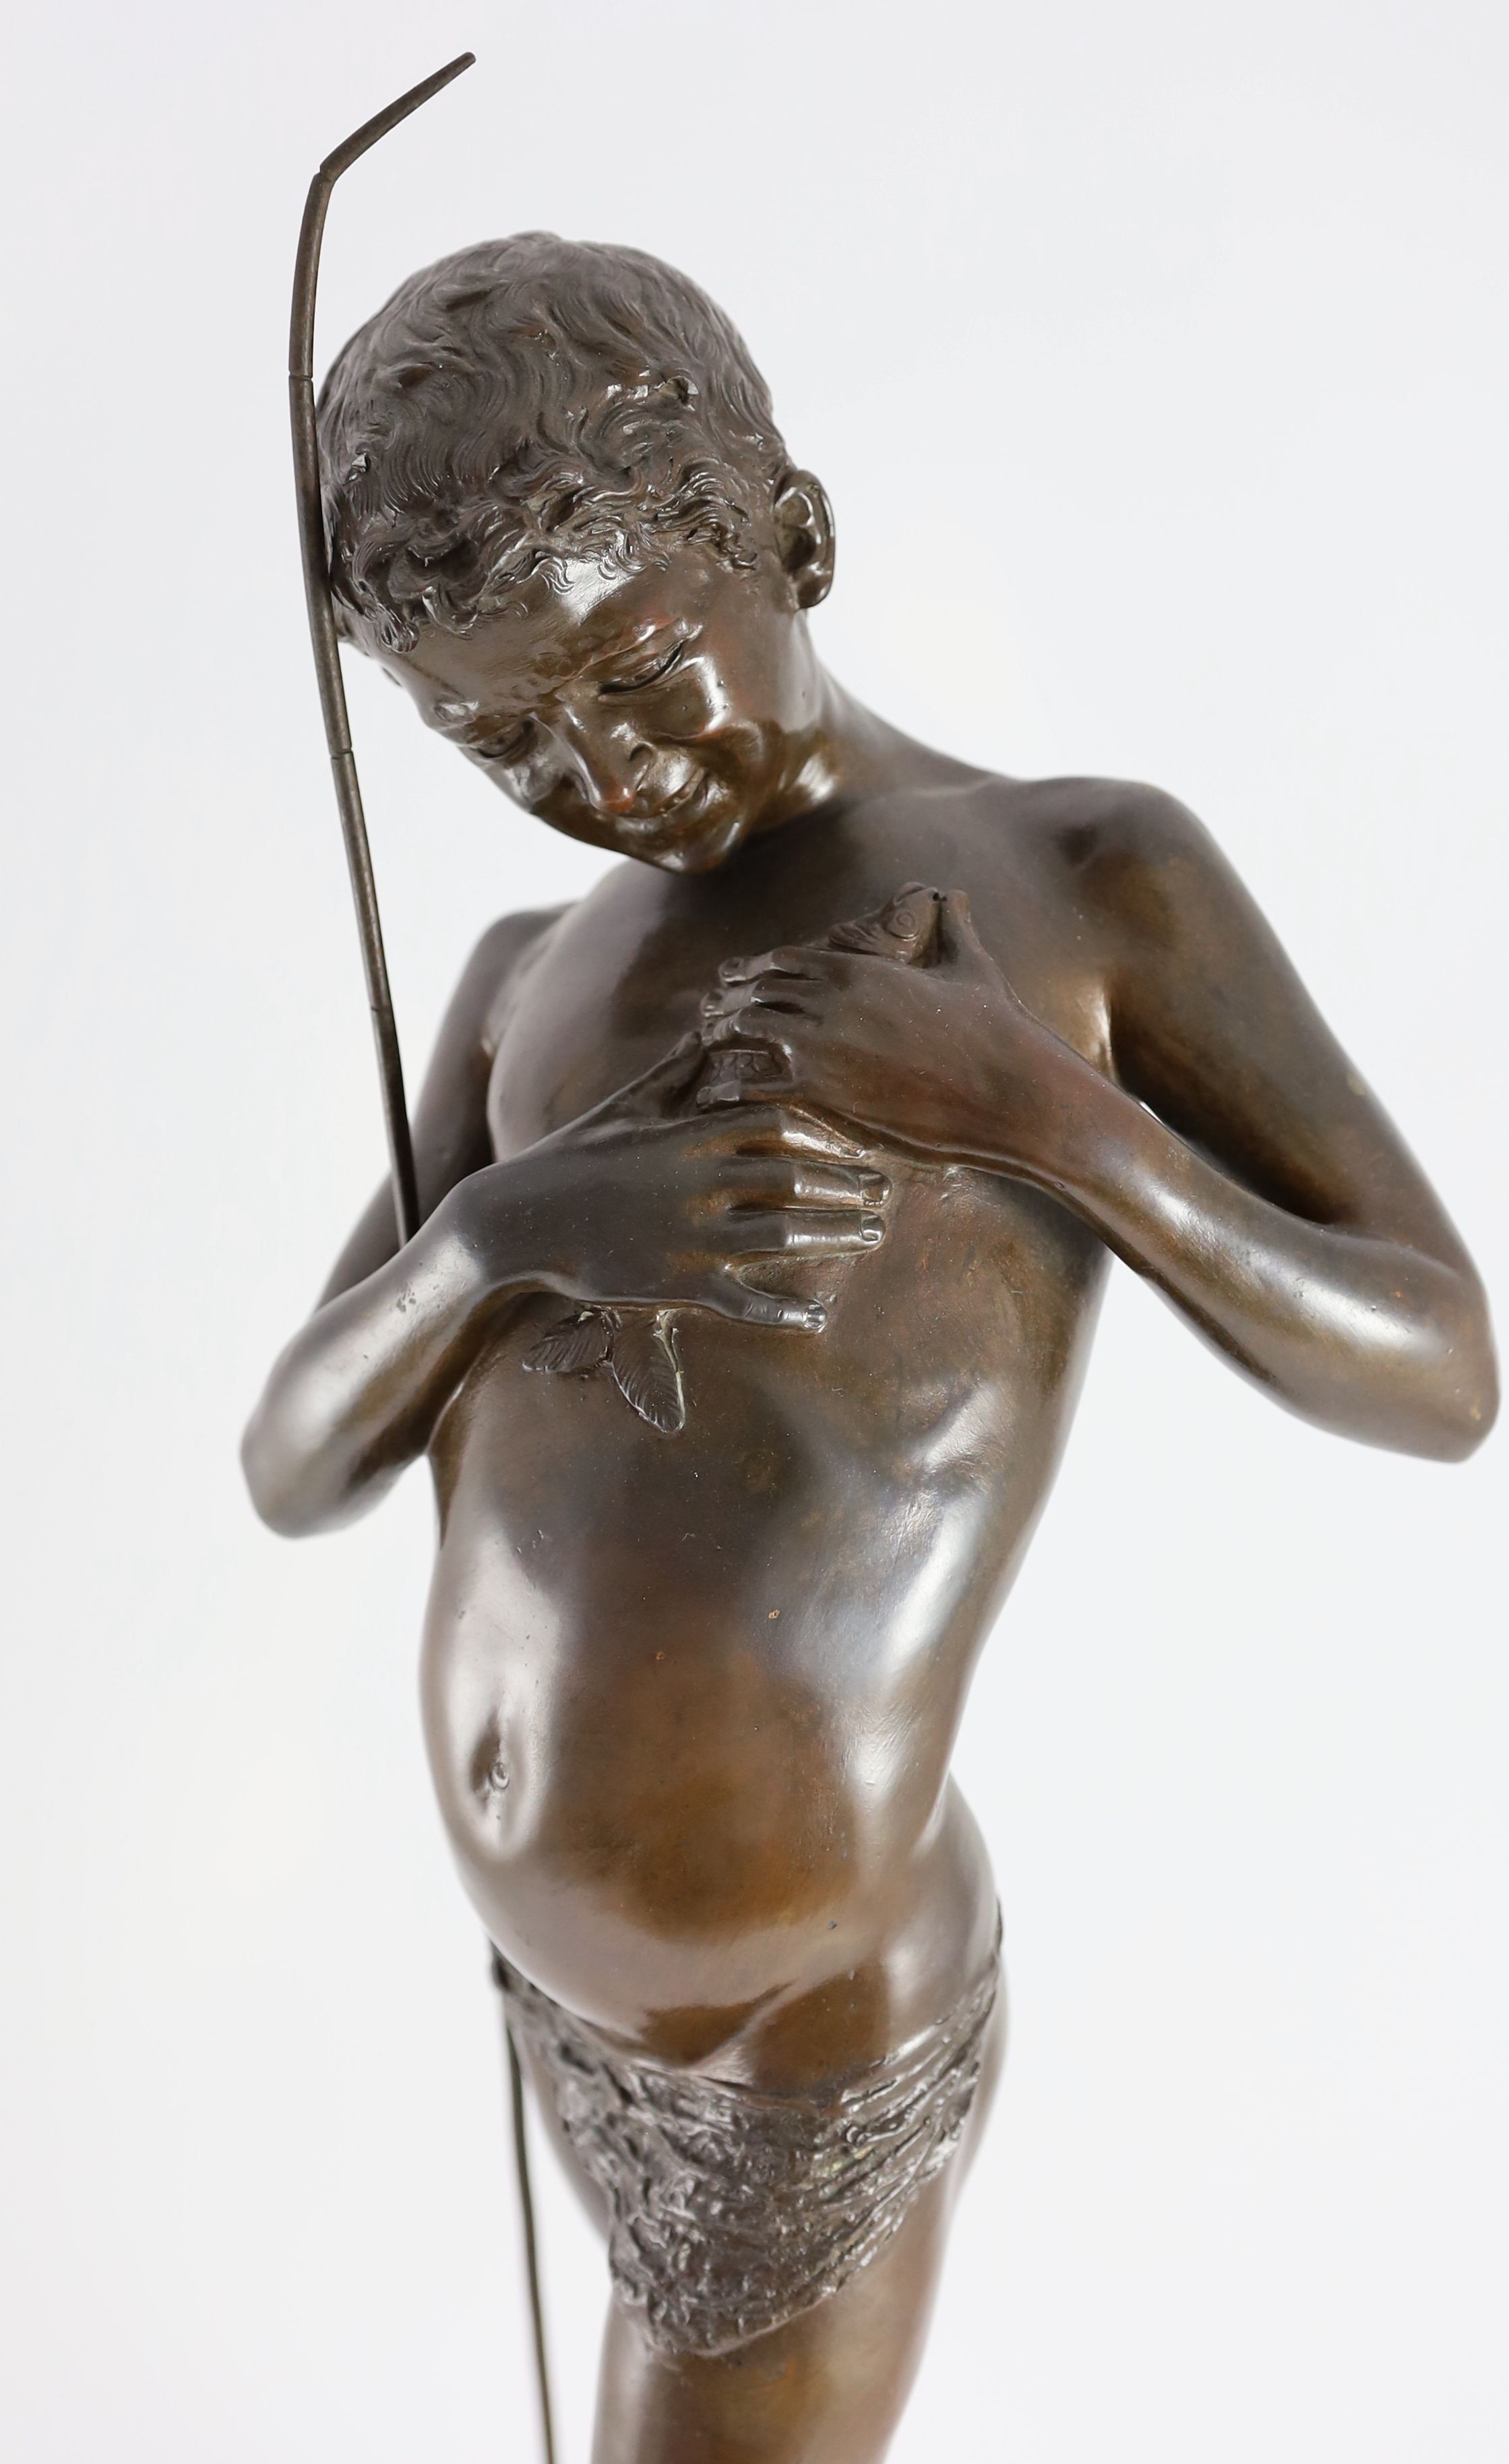 Giovanni Varlese (Italian, 1888-1922). A bronze figure of a fisherboy standing holding a fish to his chest, height 72cm